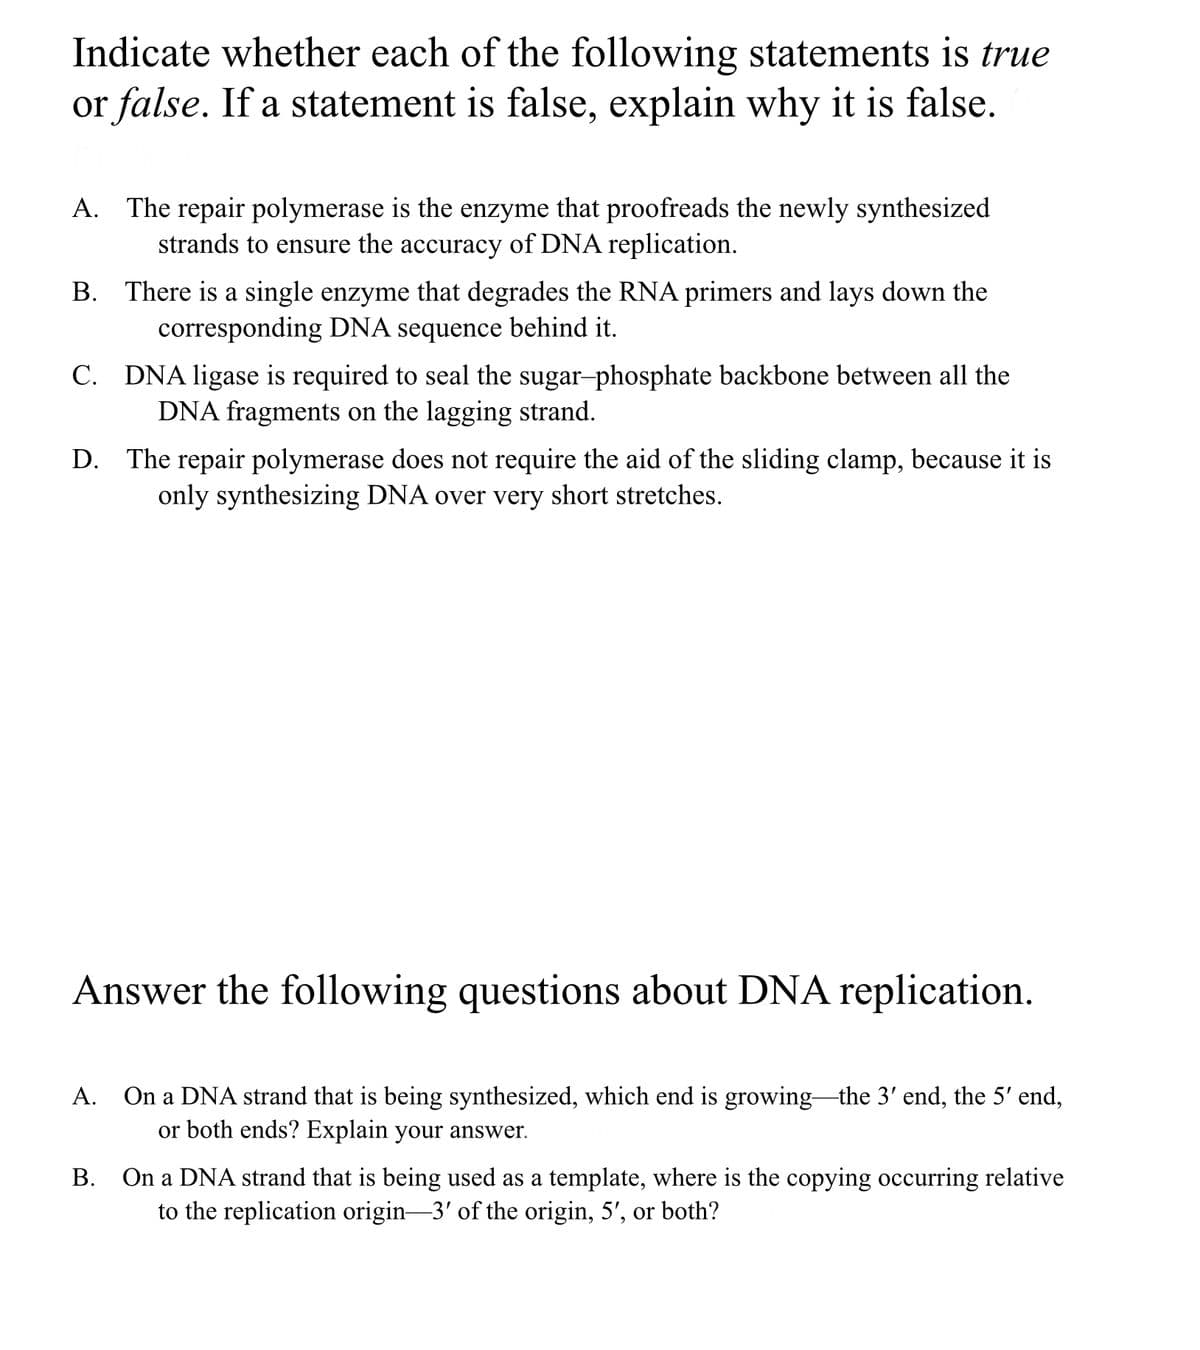 Indicate whether each of the following statements is true
or false. If a statement is false, explain why it is false.
A. The repair polymerase is the enzyme that proofreads the newly synthesized
strands to ensure the accuracy of DNA replication.
B. There is a single enzyme that degrades the RNA primers and lays down the
corresponding DNA sequence behind it.
C. DNA ligase is required to seal the sugar-phosphate backbone between all the
DNA fragments on the lagging strand.
D. The repair polymerase does not require the aid of the sliding clamp, because it is
only synthesizing DNA over very short stretches.
Answer the following questions about DNA replication.
On a DNA strand that is being synthesized, which end is growing the 3' end, the 5' end,
or both ends? Explain your answer.
А.
B. On a DNA strand that is being used as a template, where is the copying occurring relative
to the replication origin-3' of the origin, 5', or both?
